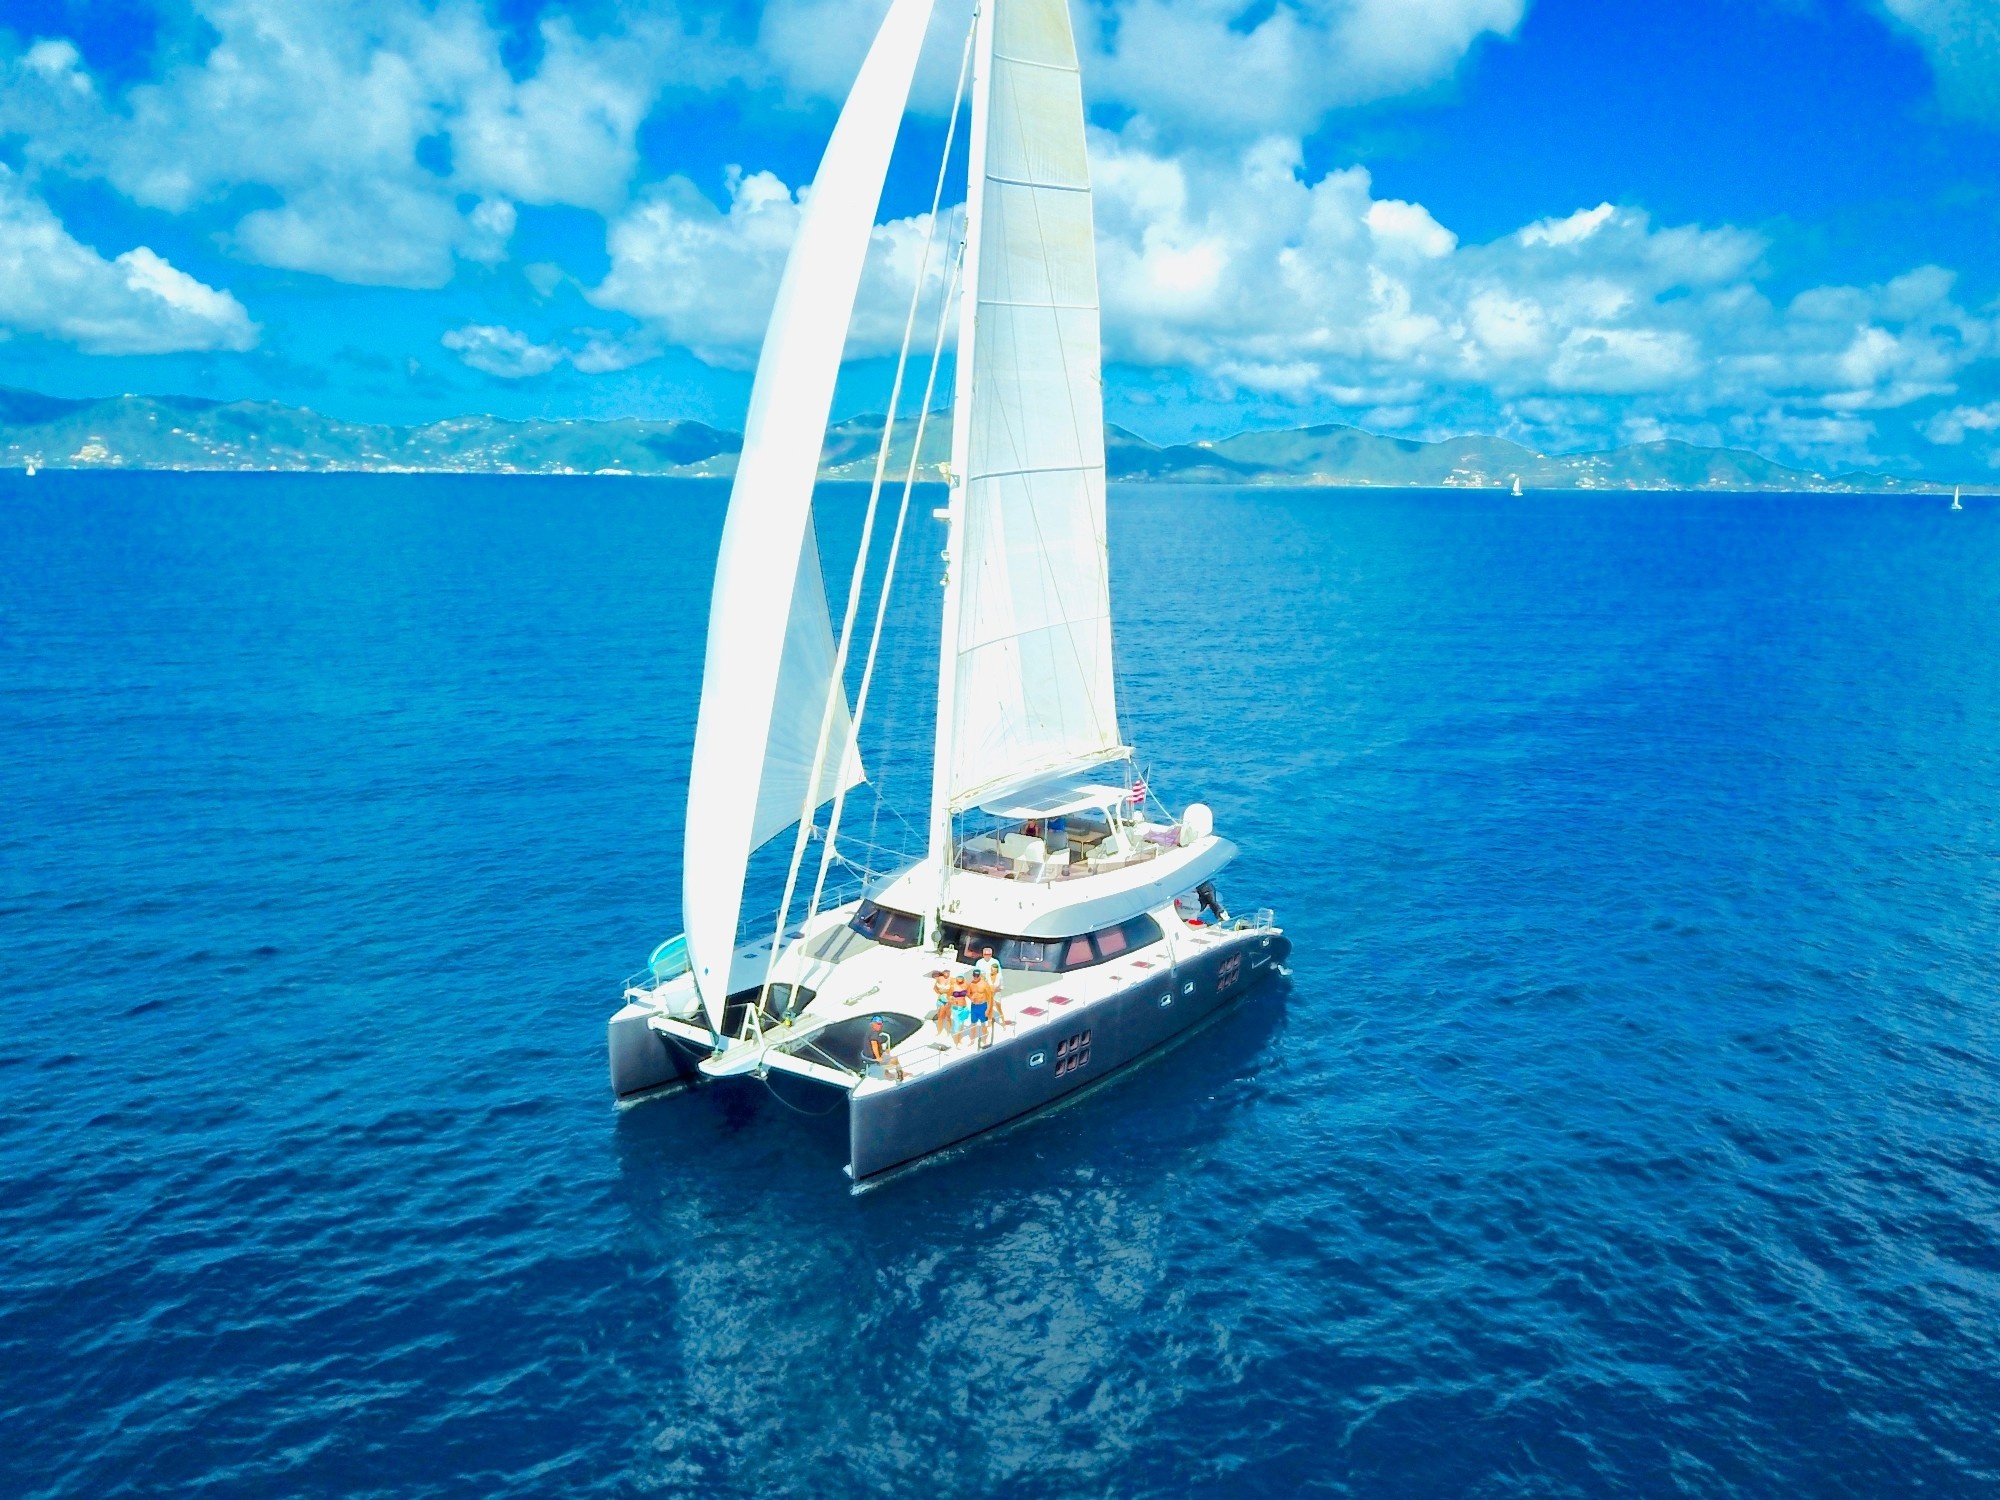 Catamaran: Sunreef 70, The yacht’s hull and superstructure designed to maximize living space and seaworthiness. 2000x1500 HD Wallpaper.